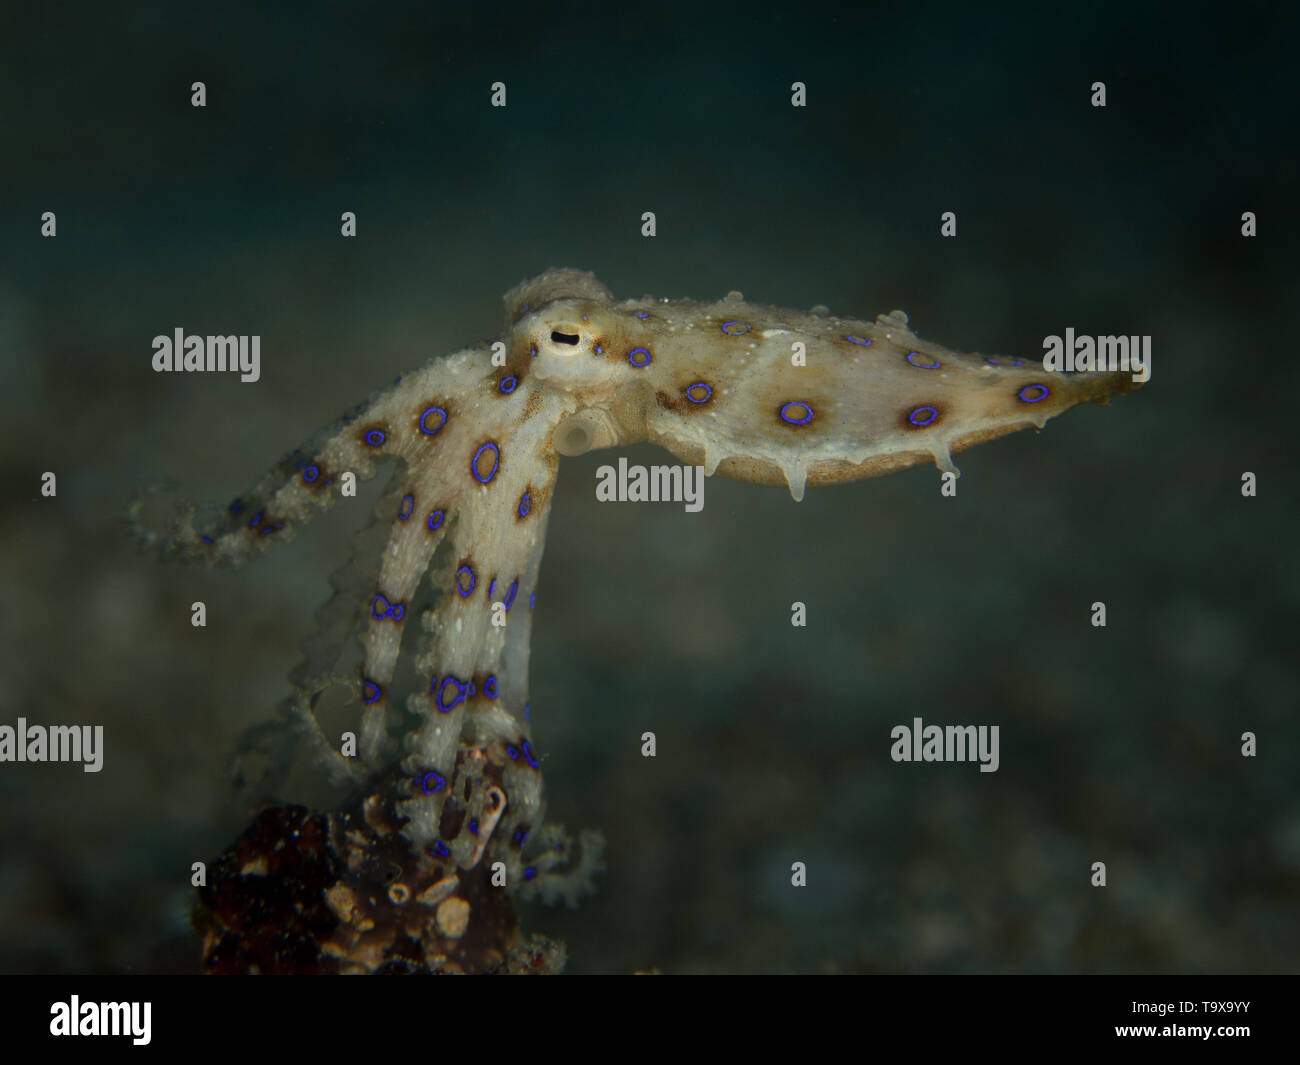 Blue ring octopus on a sandy bottom on a muck dive in Sulawesi, Indonesia Stock Photo